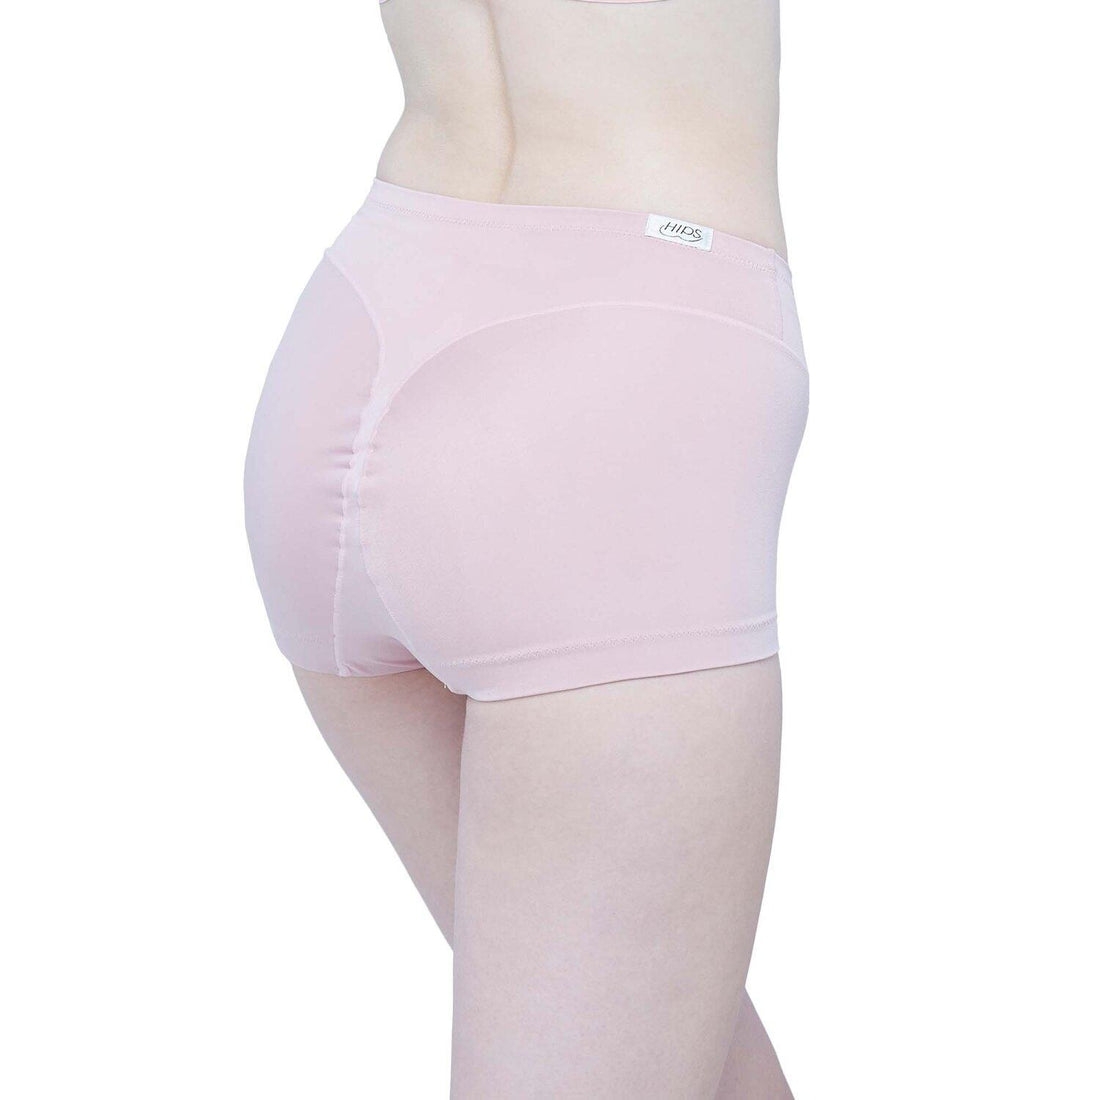 Wacoal Cool Innovation Hips model underwear for buttocks and hips WY1177 carnation pink (CP)